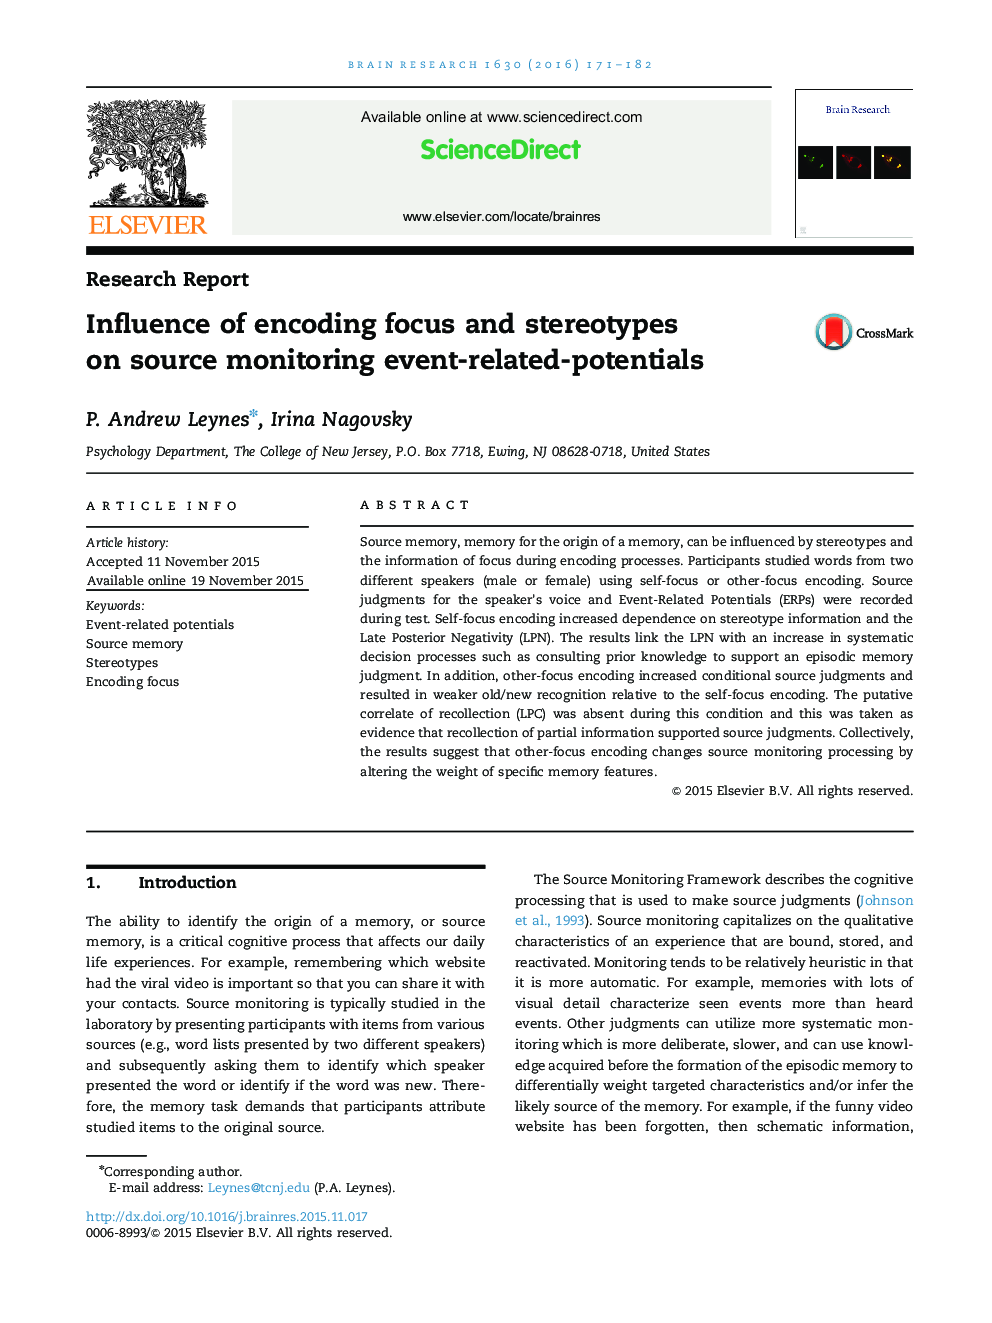 Research ReportInfluence of encoding focus and stereotypes on source monitoring event-related-potentials